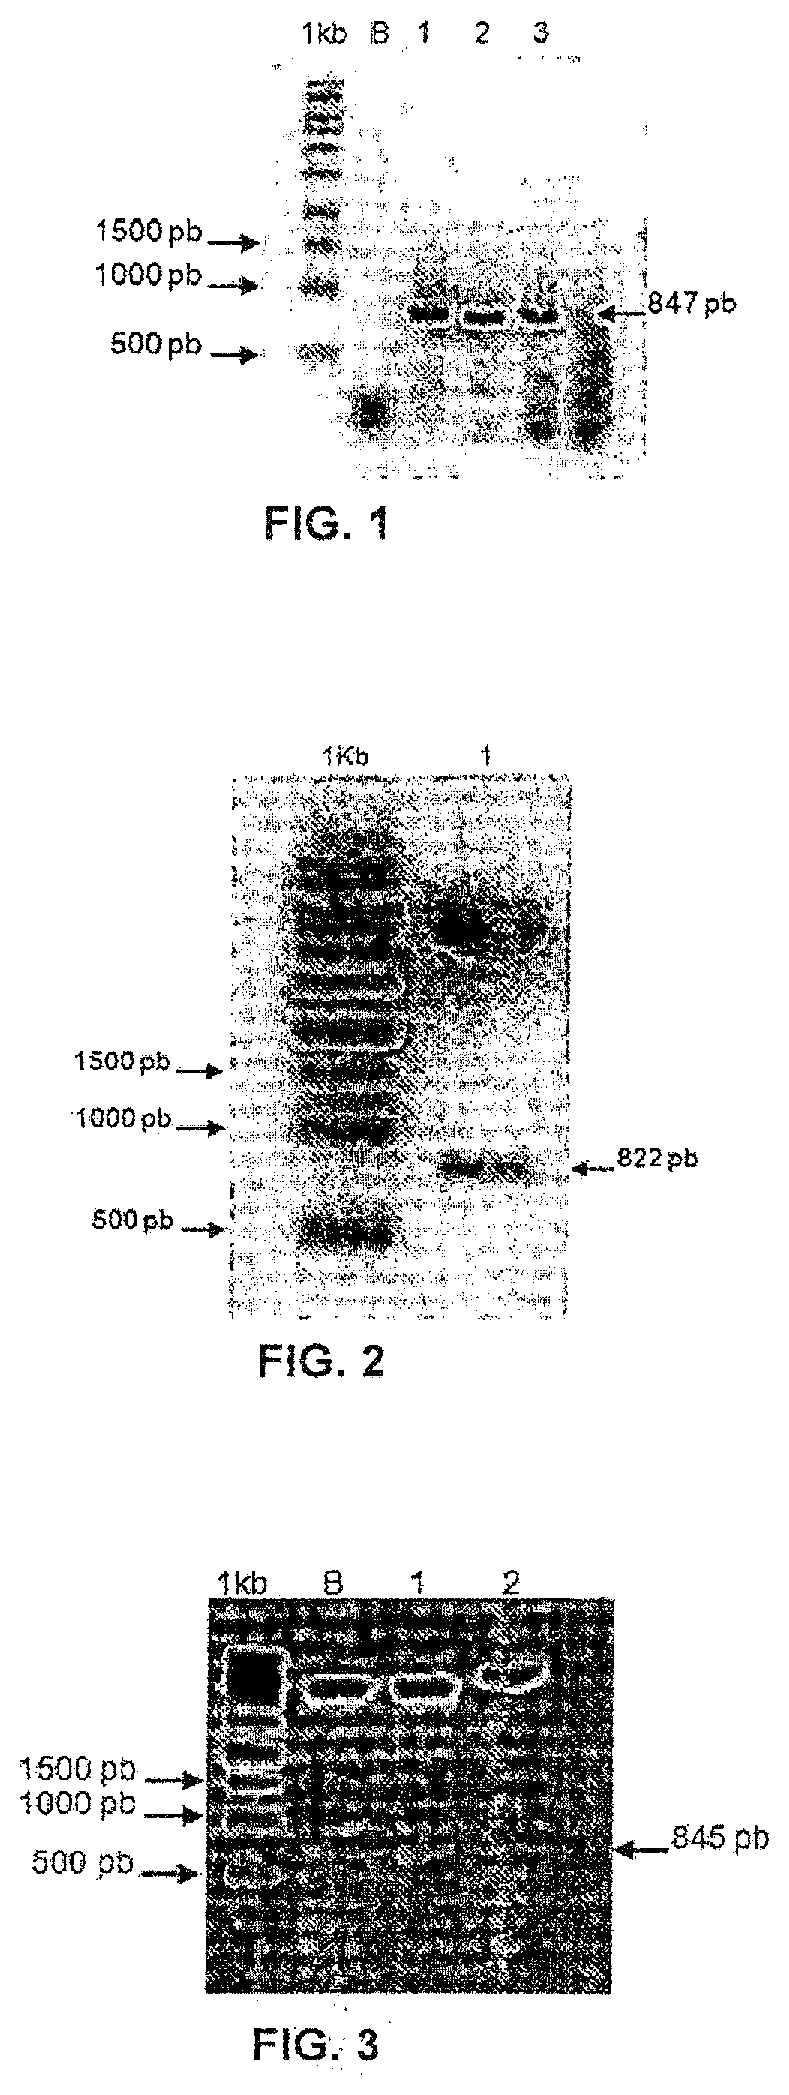 Method for producing and purifying hybrid or non-hybrid recombinant glycoprotein hormones, hybrid or non-hybrid recombinant glycoprotein hormones, expression vectors and uses of the recombinant glycoprotein hormones